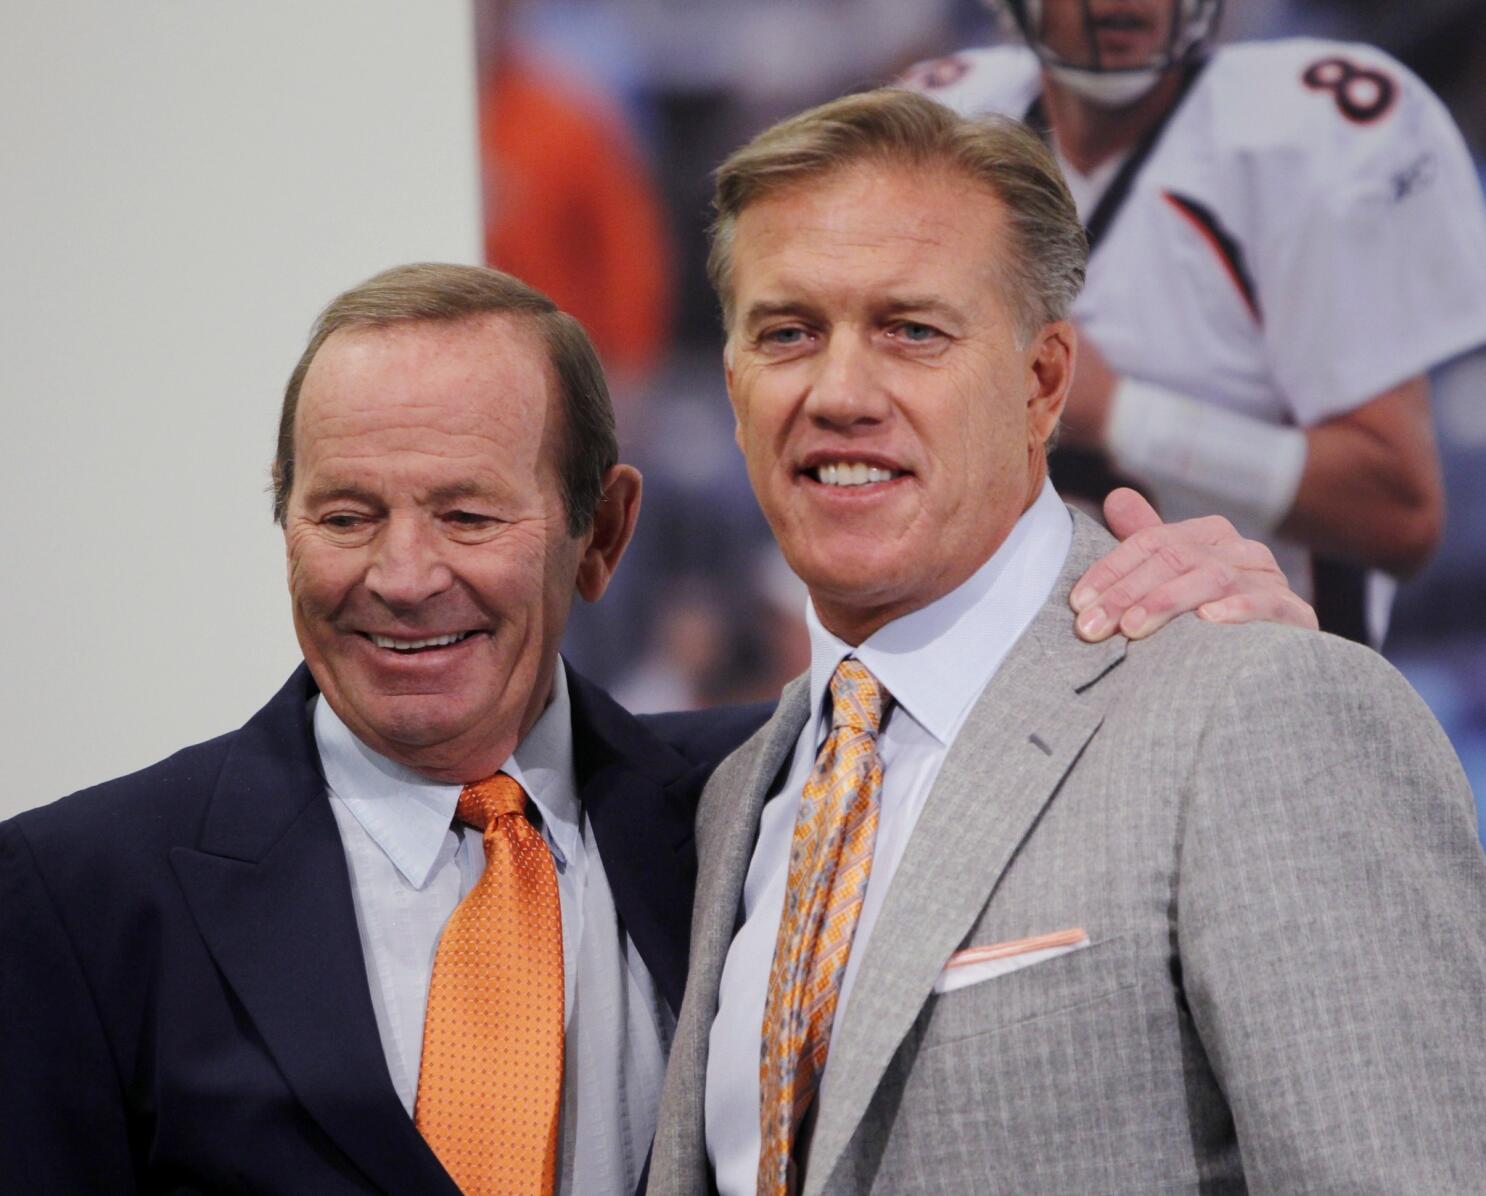 Pat Bowlen steps away, and Denver Broncos celebrate his shaping of NFL -  Sports Illustrated